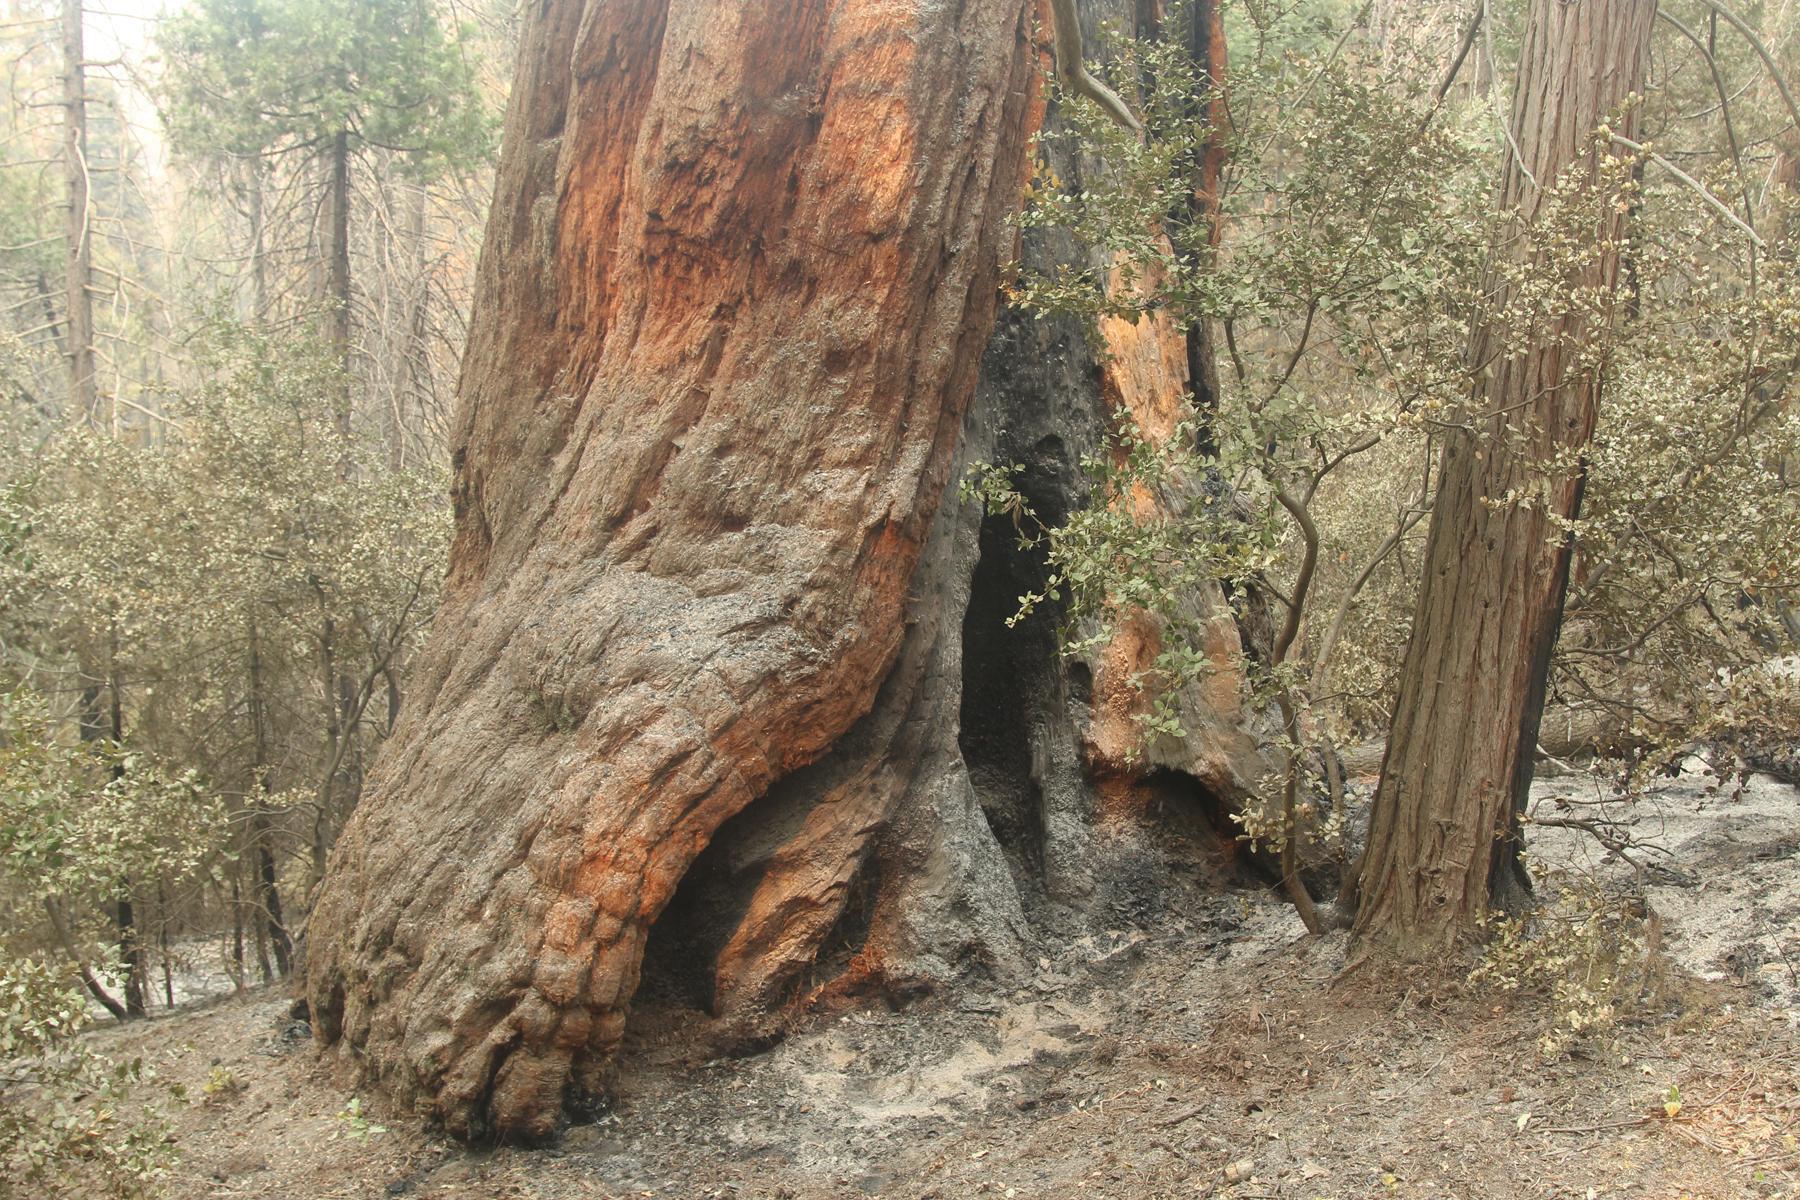 The base of a partially burned Giant Sequoia Tree in the Redwood Grove along Deer Creek Road.